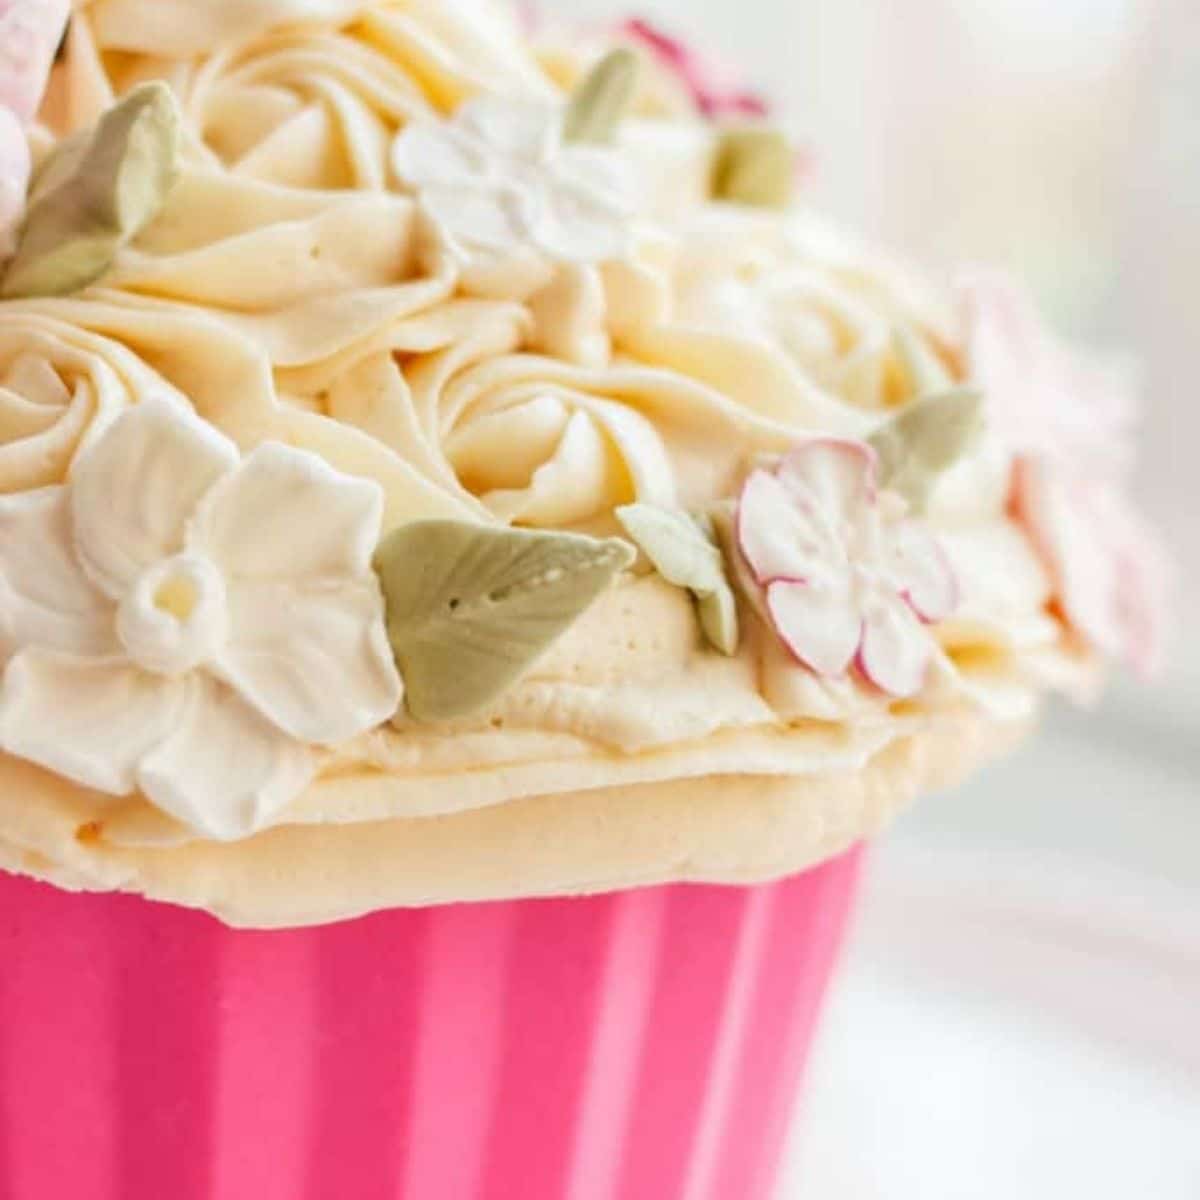 https://thecookiewriter.com/wp-content/uploads/2014/05/giant-cupcake-tutorial-featured.jpg